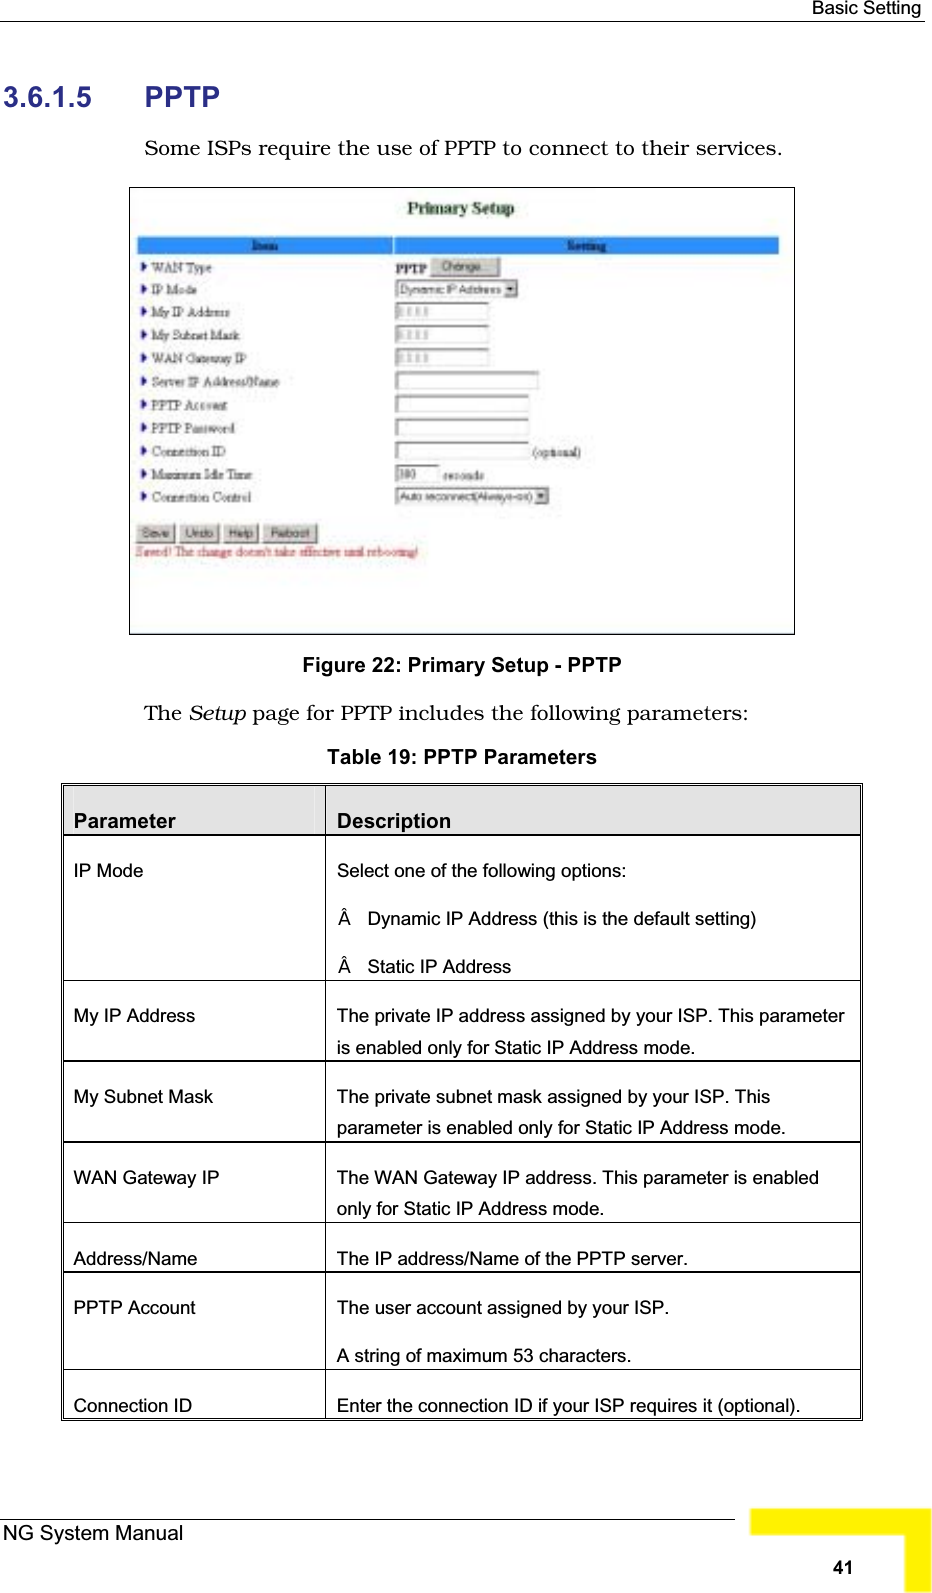 Basic Setting 3.6.1.5 PPTP Some ISPs require the use of PPTP to connect to their services.Figure 22: Primary Setup - PPTP The Setup page for PPTP includes the following parameters:Table 19: PPTP Parameters Parameter DescriptionIP Mode  Select one of the following options:Dynamic IP Address (this is the default setting)Static IP Address My IP Address The private IP address assigned by your ISP. This parameteris enabled only for Static IP Address mode.My Subnet Mask The private subnet mask assigned by your ISP. Thisparameter is enabled only for Static IP Address mode. WAN Gateway IP  The WAN Gateway IP address. This parameter is enabledonly for Static IP Address mode.Address/Name The IP address/Name of the PPTP server. PPTP Account  The user account assigned by your ISP. A string of maximum 53 characters.Connection ID  Enter the connection ID if your ISP requires it (optional).NG System Manual41